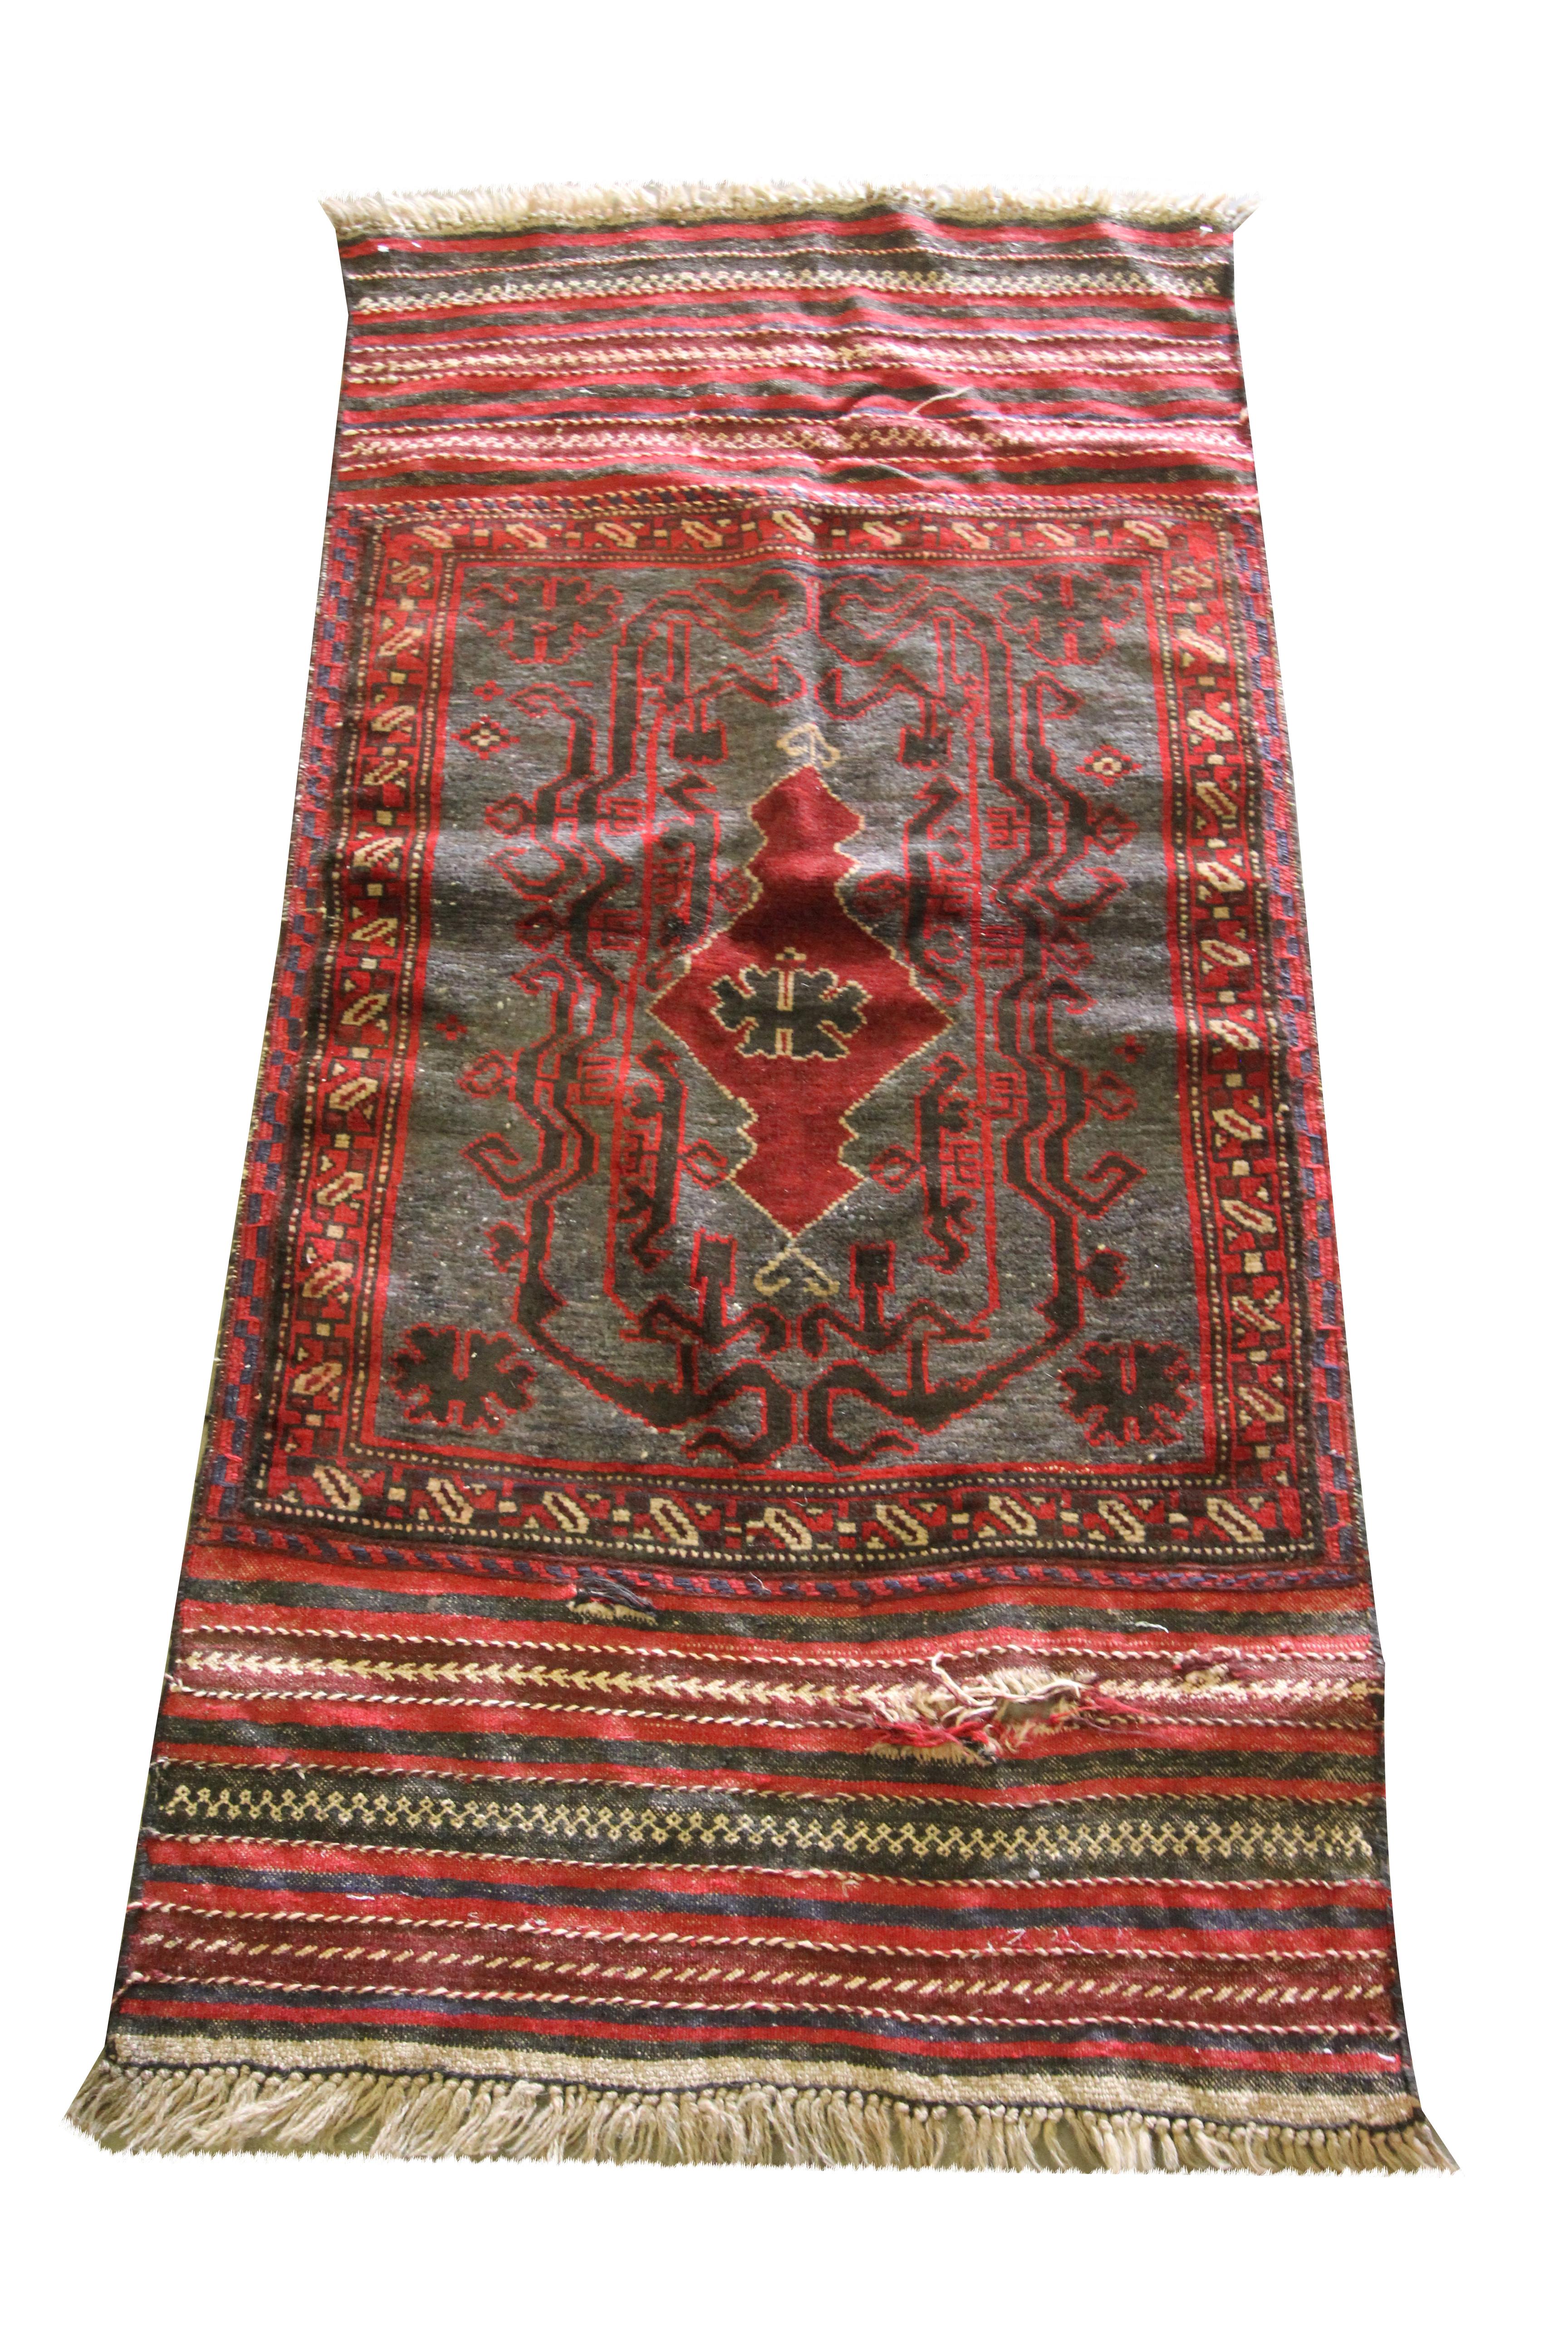 This beautiful red rug is a vintage Afghan Baluch, woven by hand in the mid 20th century, circa 1950. The design features a bold central motif design woven in red and grey. This is then framed by a geometric design and striped edges. The colour